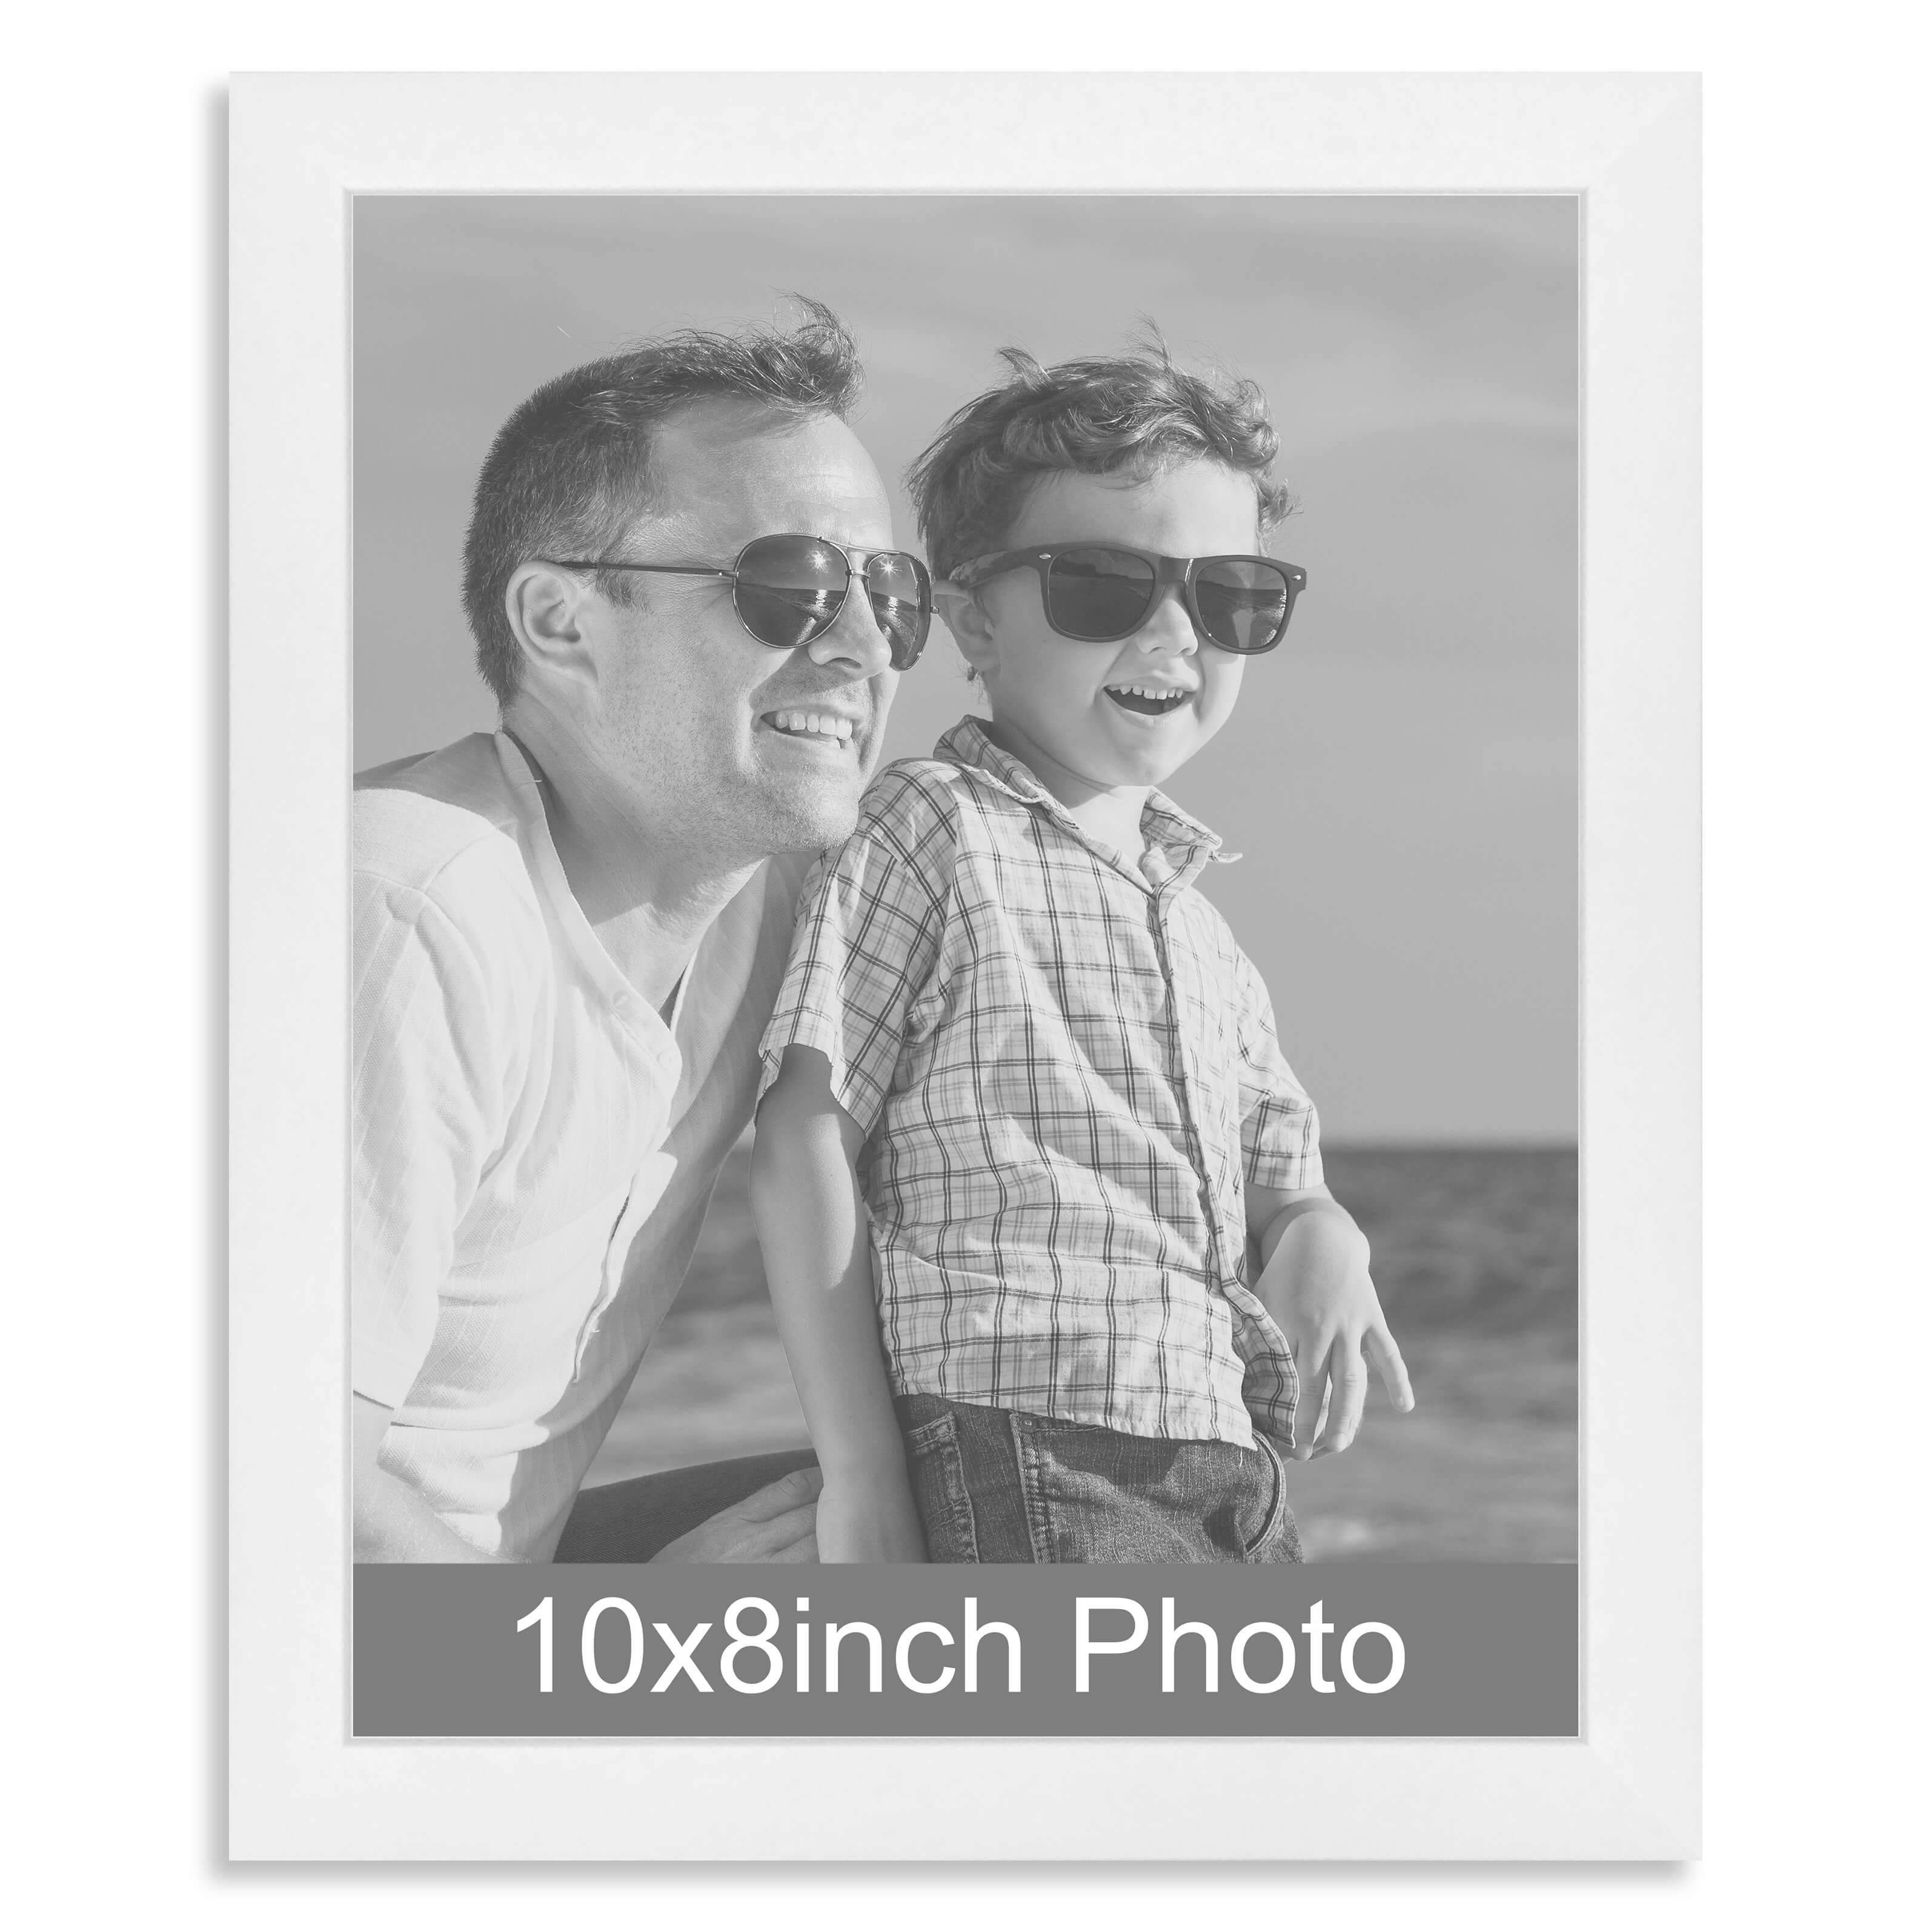 10 x 8inch White Wooden Photo Frame for a 10×8/8x10in image – Photo Not Required